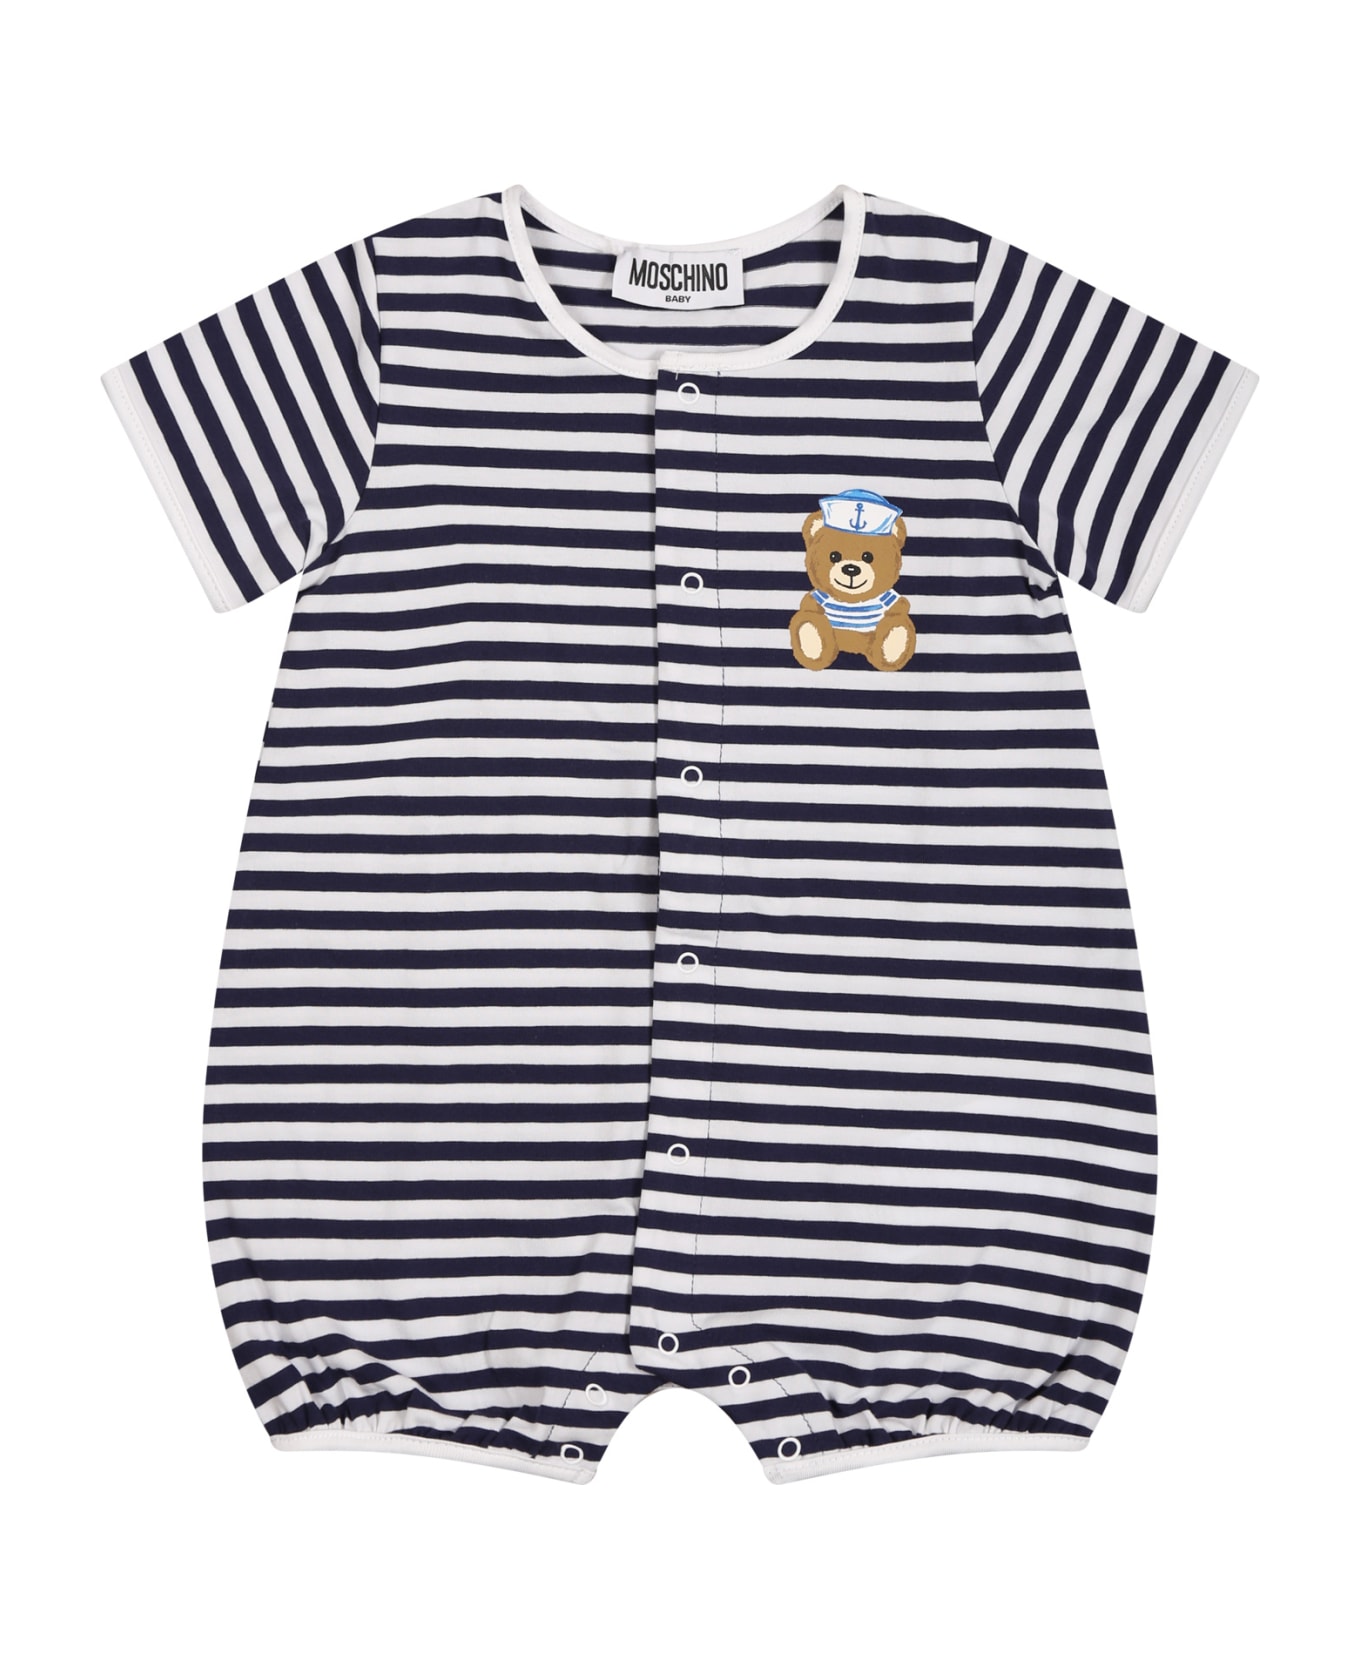 Moschino Multicolor Romper For Baby Boy With Teddy Bear And Logo - Blue